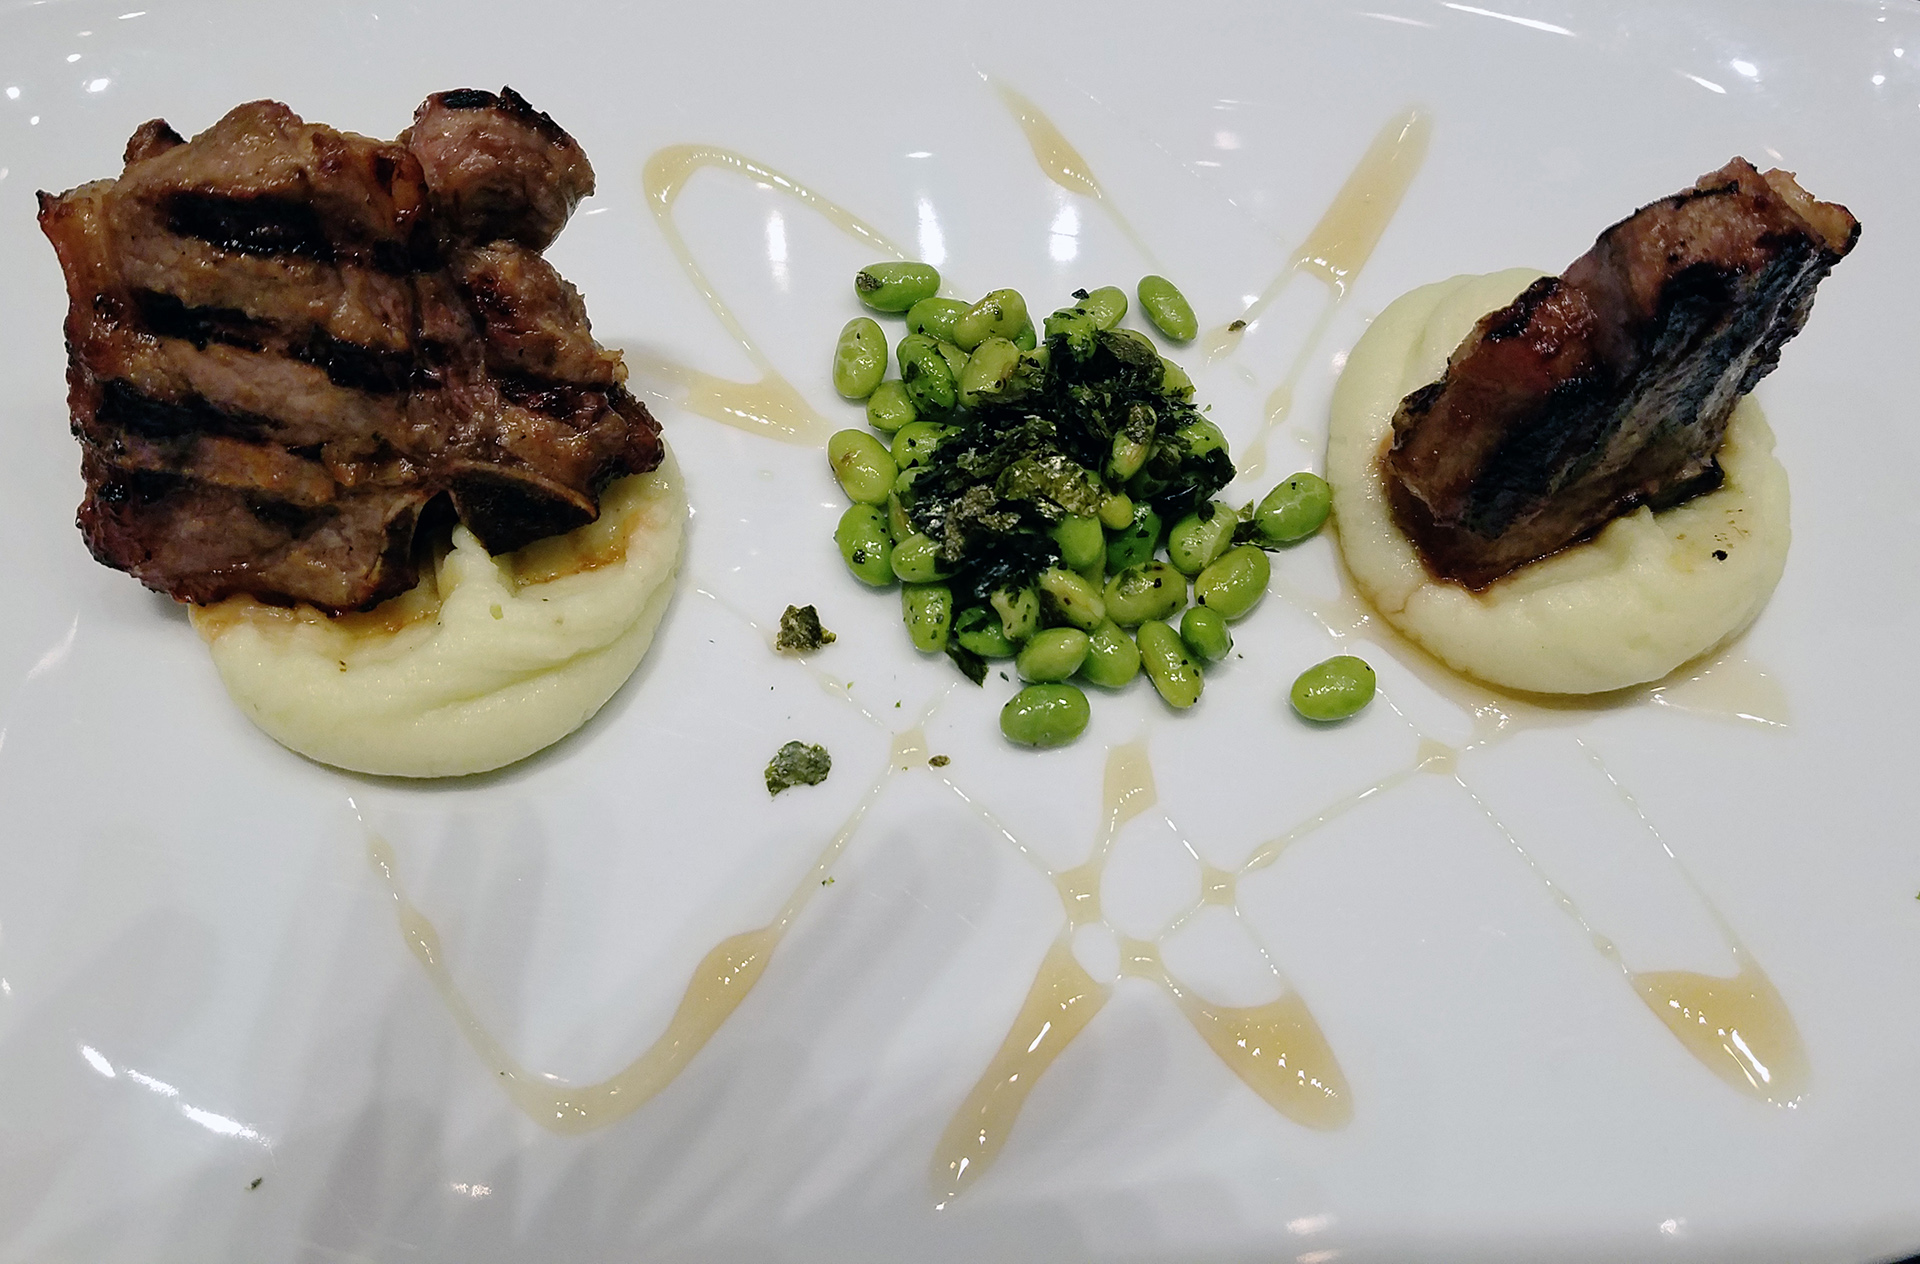 Grilled lanm chops served with soy beans and mashed potatoes 